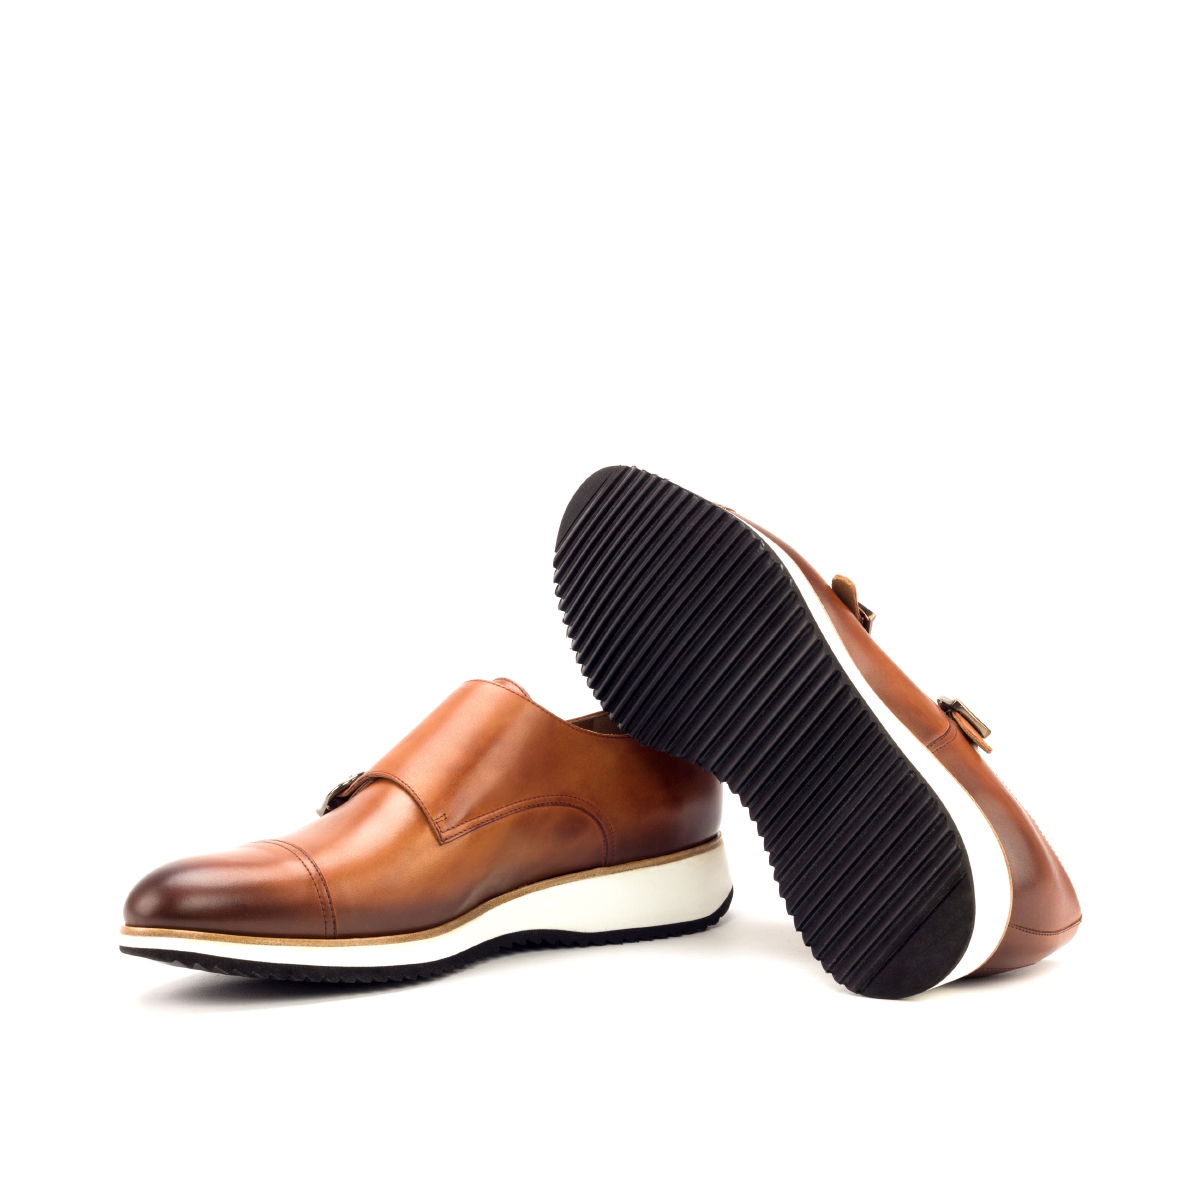 Cognac Double Monk with Running Sole